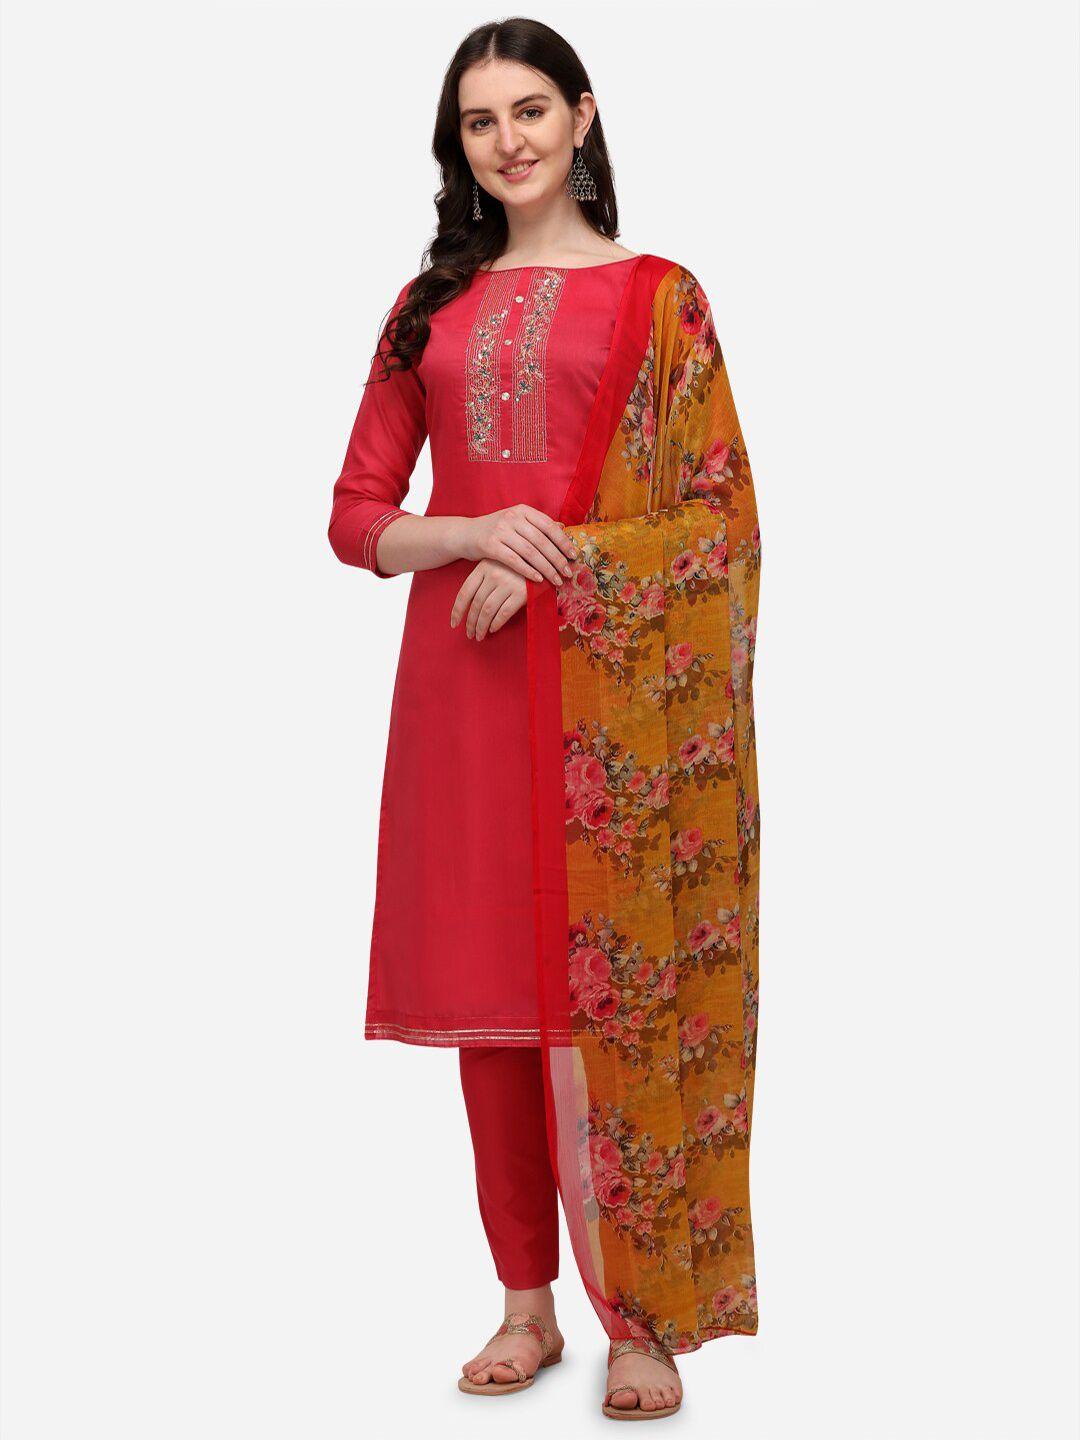 rajgranth women pink & yellow floral embroidered unstitched dress material